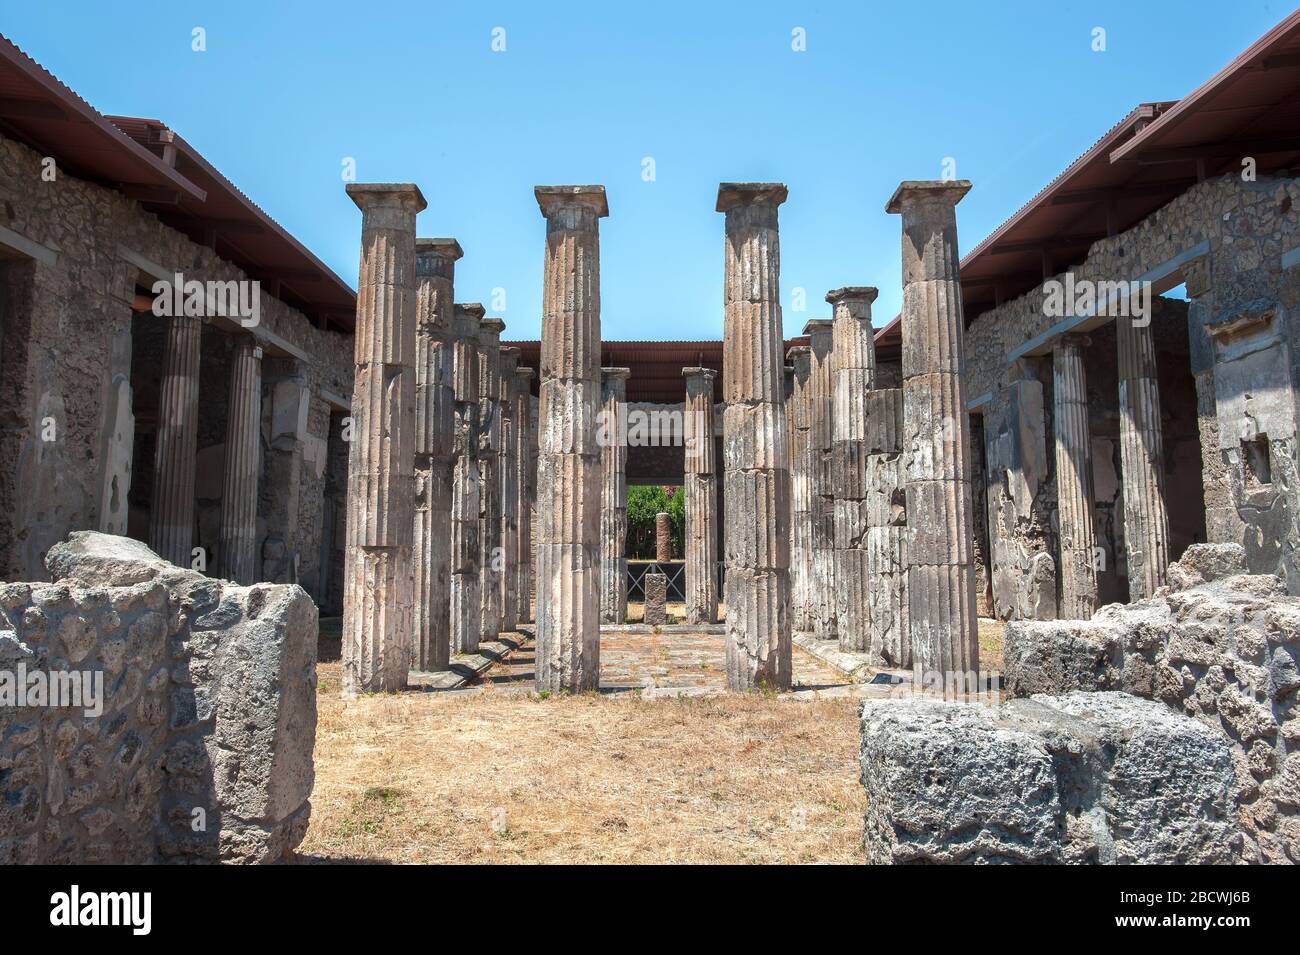 Ancient Doric columns stand in the remains of the House of Marcus Epidius Rufus (also known as the House of the Diadumeni), Pompeii, Italy. Stock Photo